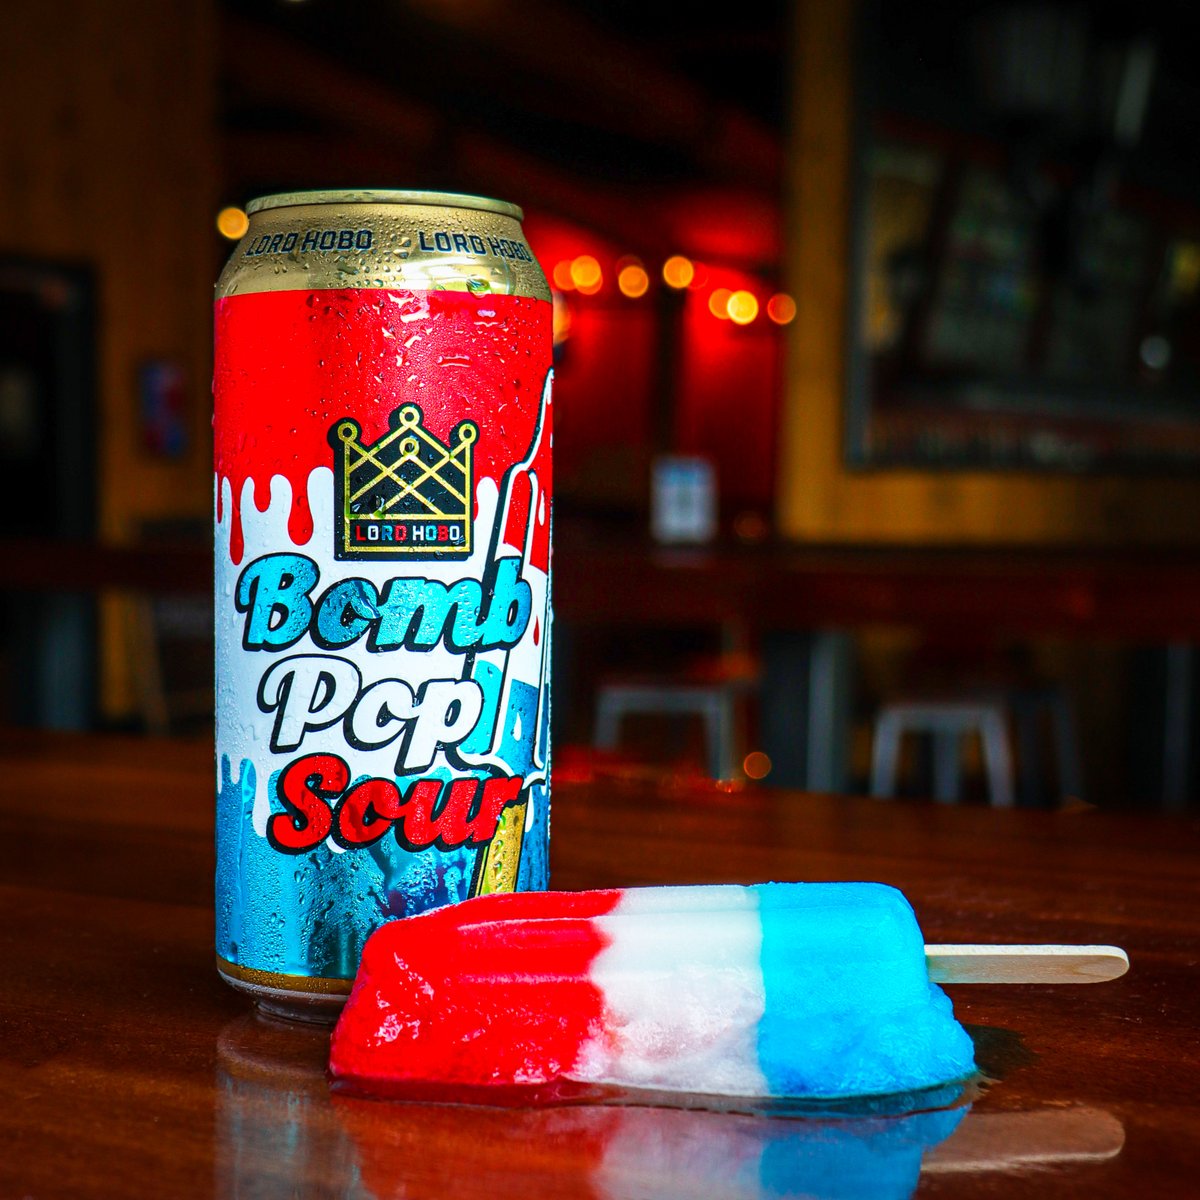 Bomb Pop Sour is back! With explosive flavors of cherry, lemon, and blue raspberry, this sour is the perfect combination of tart and sweet. Available exclusively at our locations. Releasing today at Lord Hobo Woburn, and hitting Lord Hobo Boston & Cambridge bar later this week.